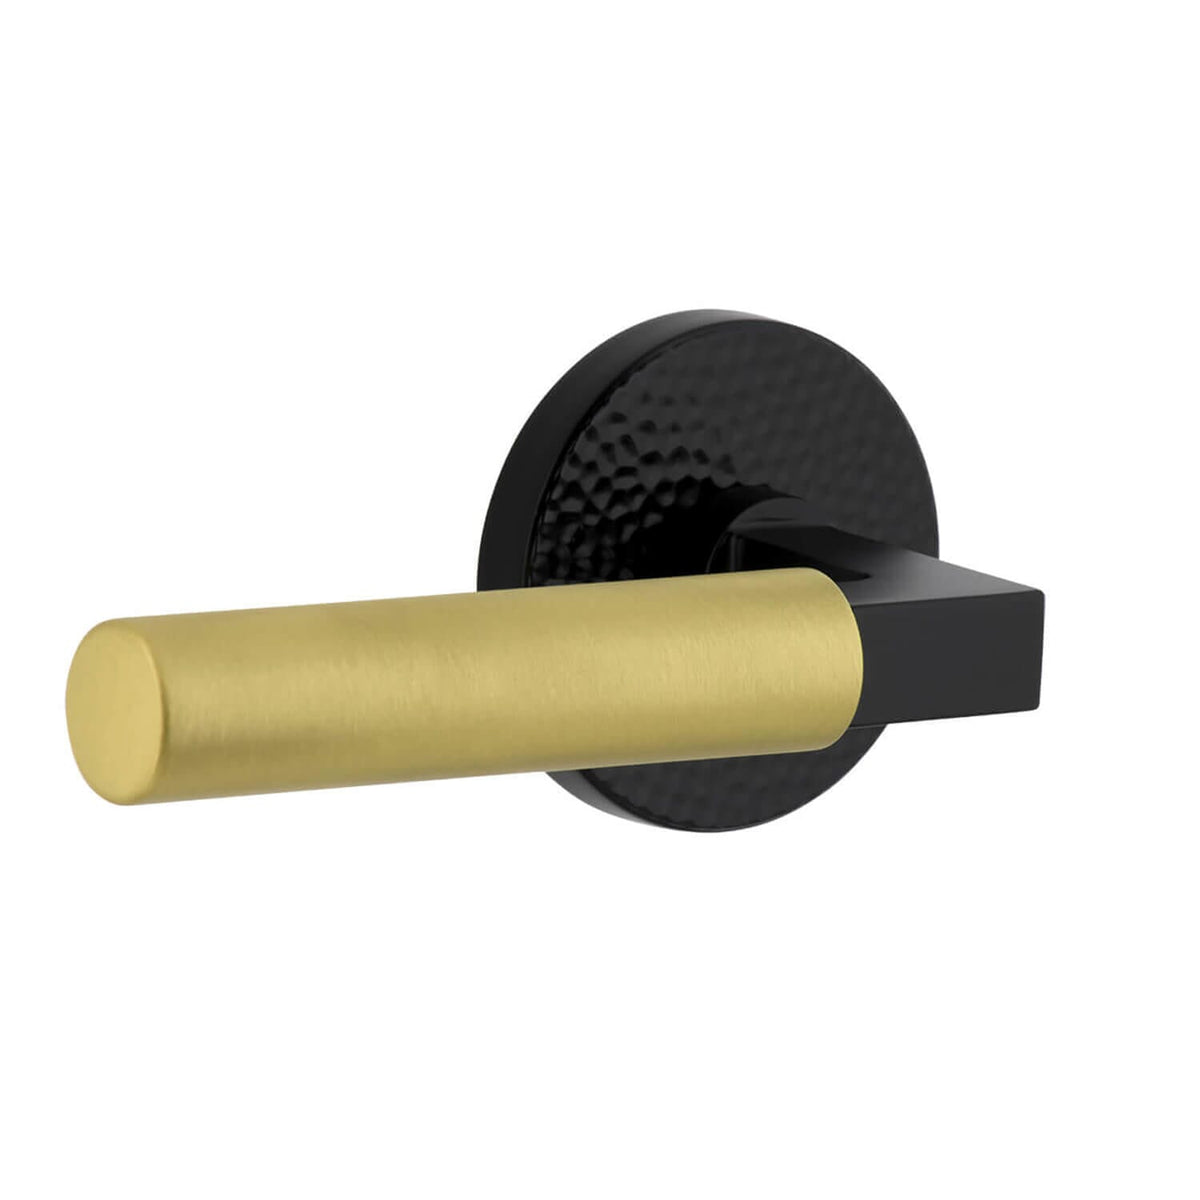 Circolo Hammered Rosette in Satin Black with Satin Brass Contempo Smooth Lever